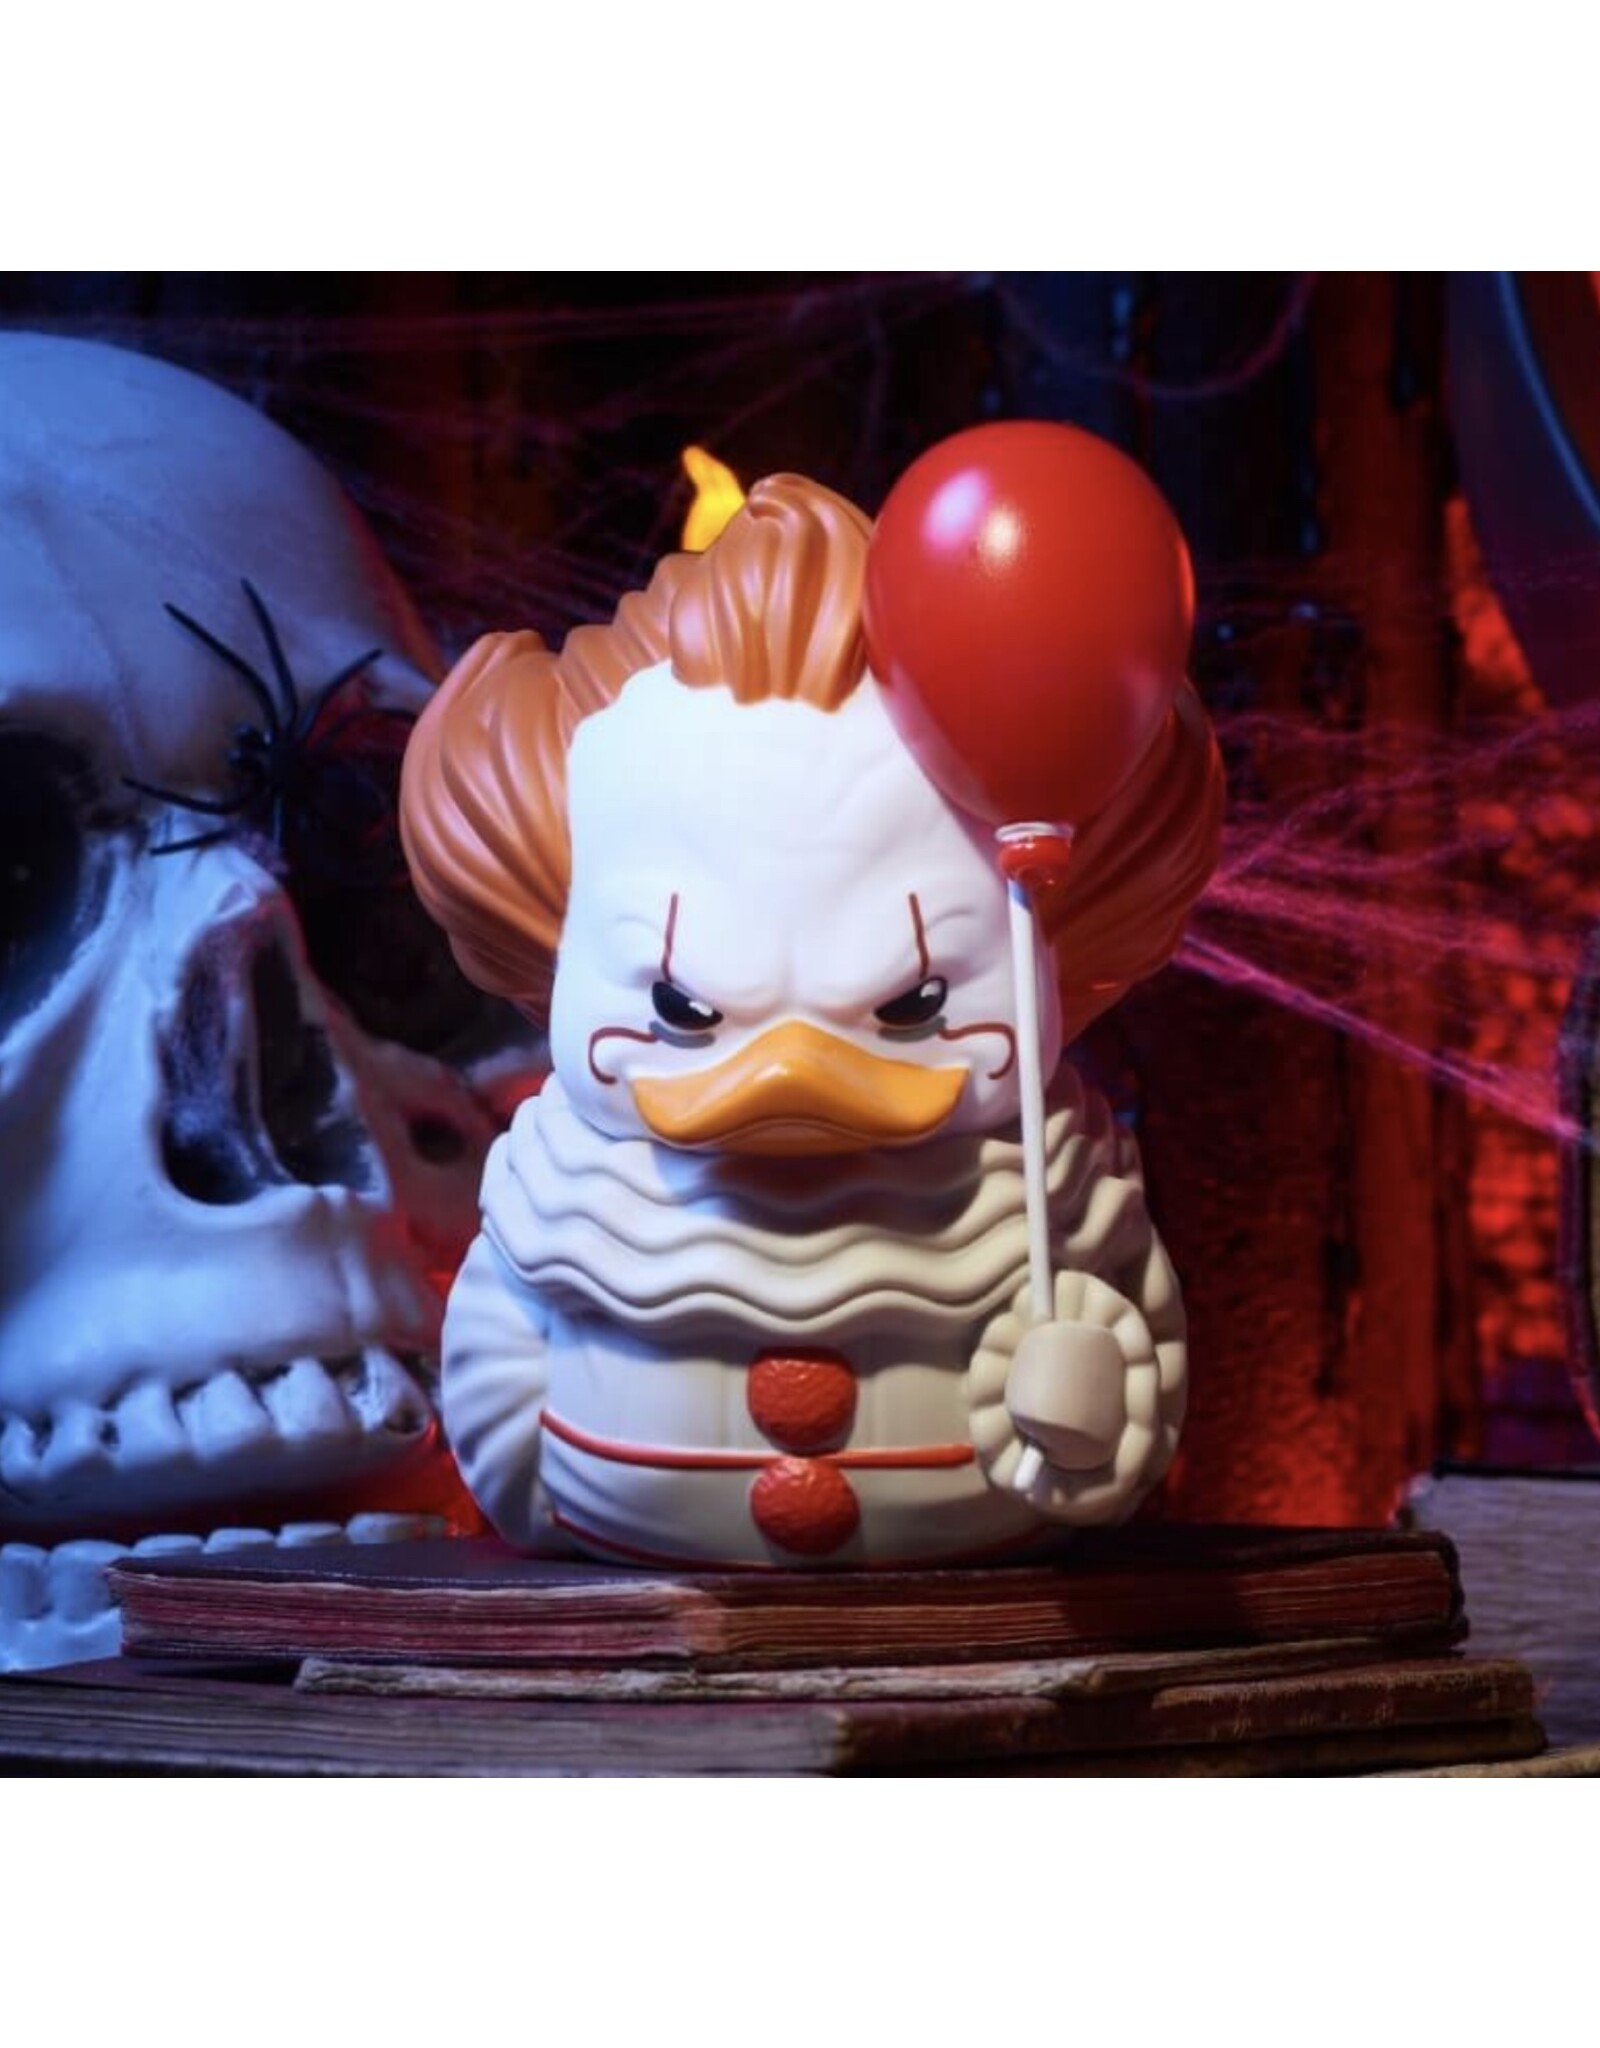 Tubbz IT Pennywise Rubber Duck  - Boxed Edition